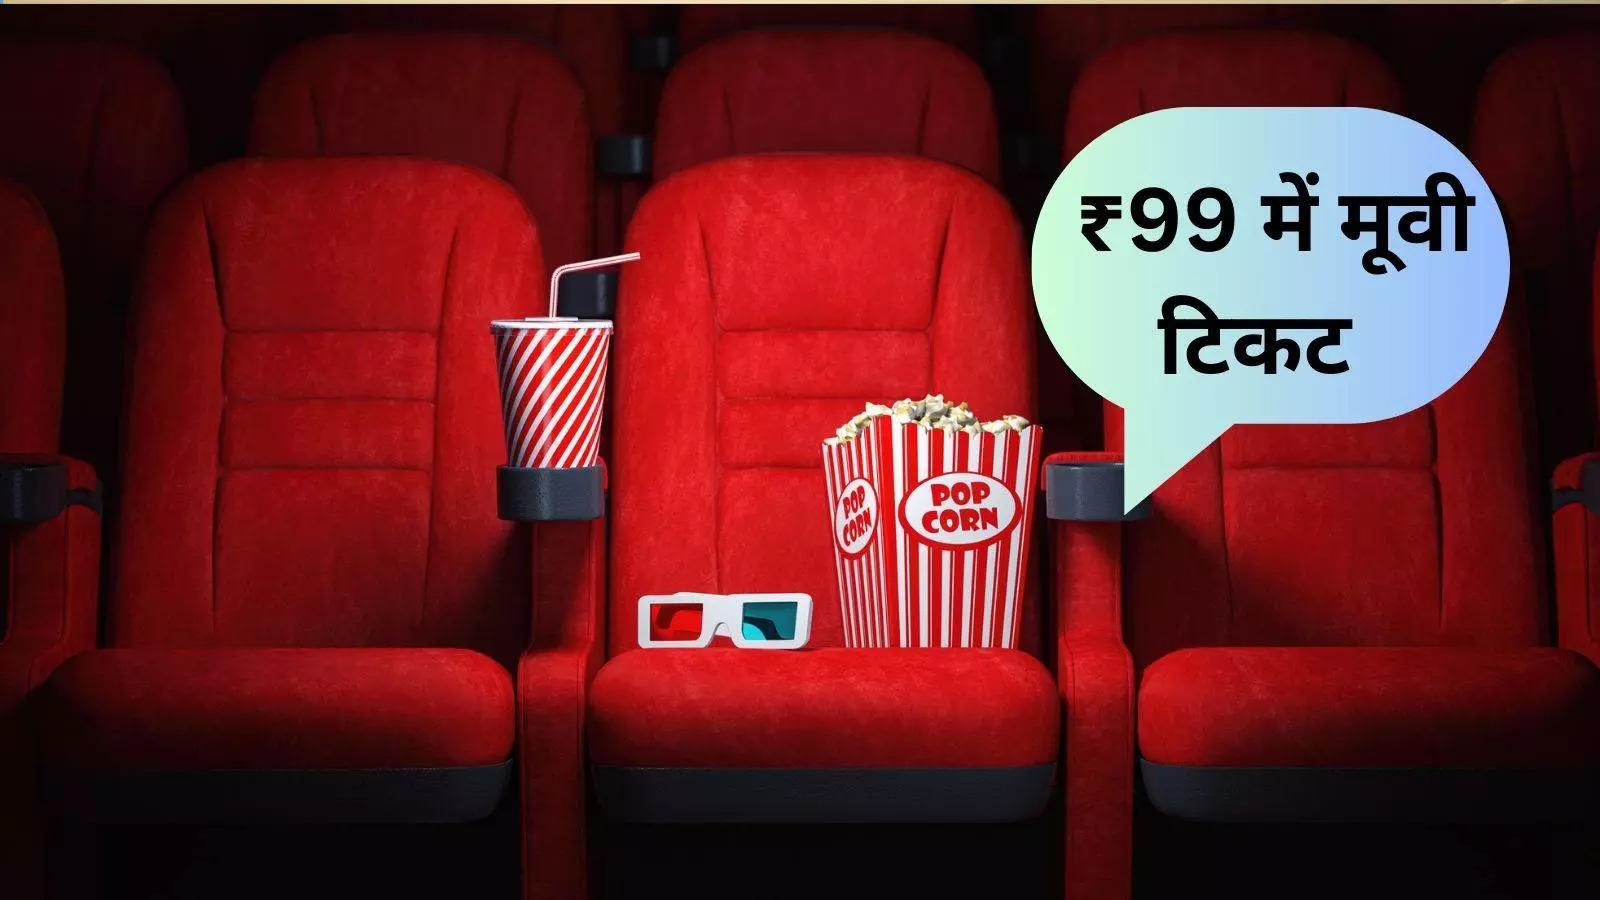 Cinema Festival is tomorrow… You can watch any movie in every theatre for just 99 rupees, make a booking